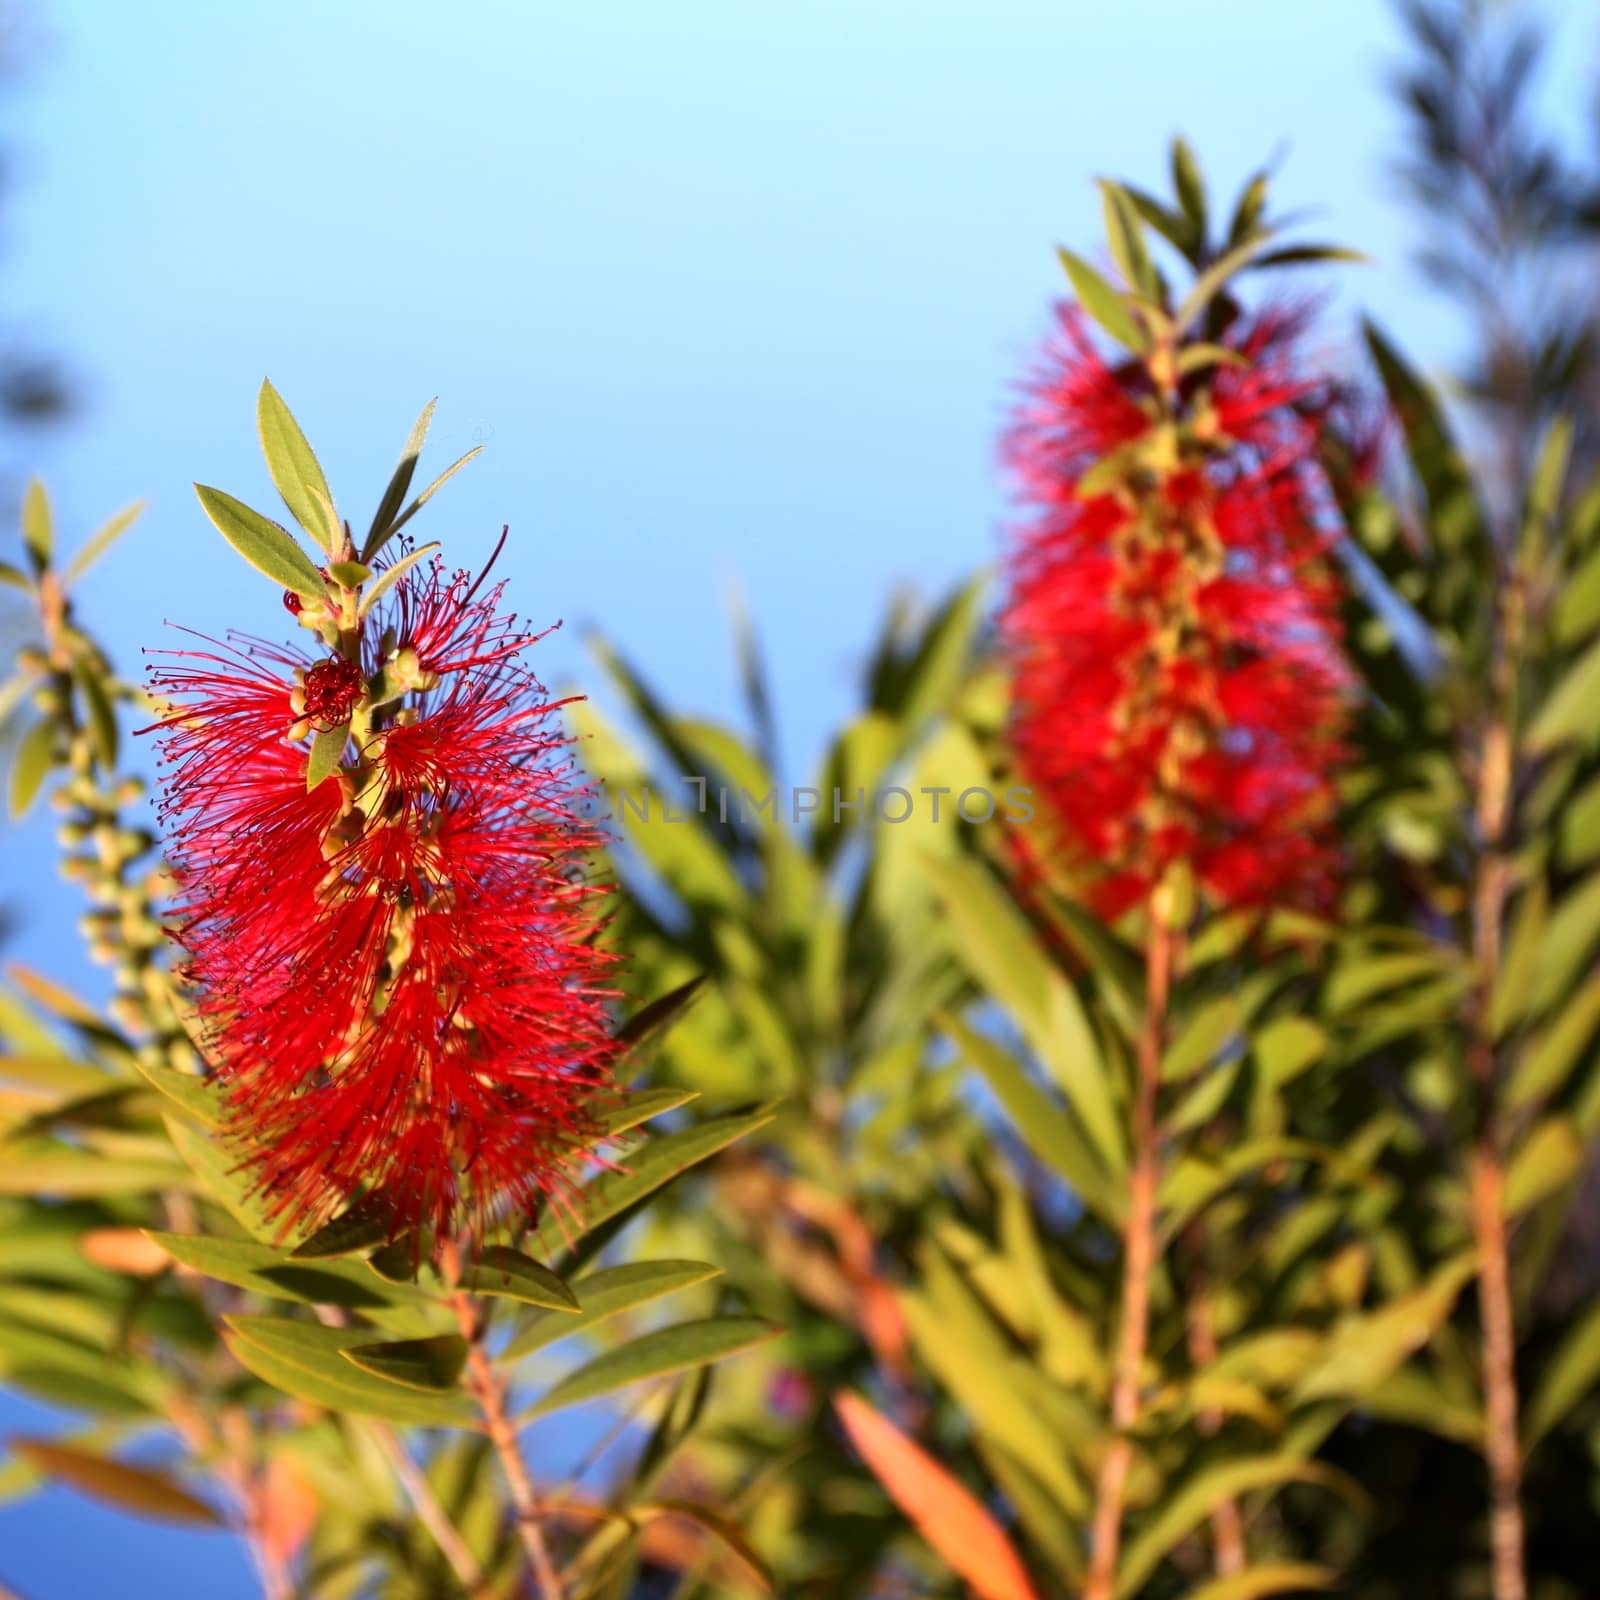 Red Bottlebrush Callistemon with a blue sky in the background.